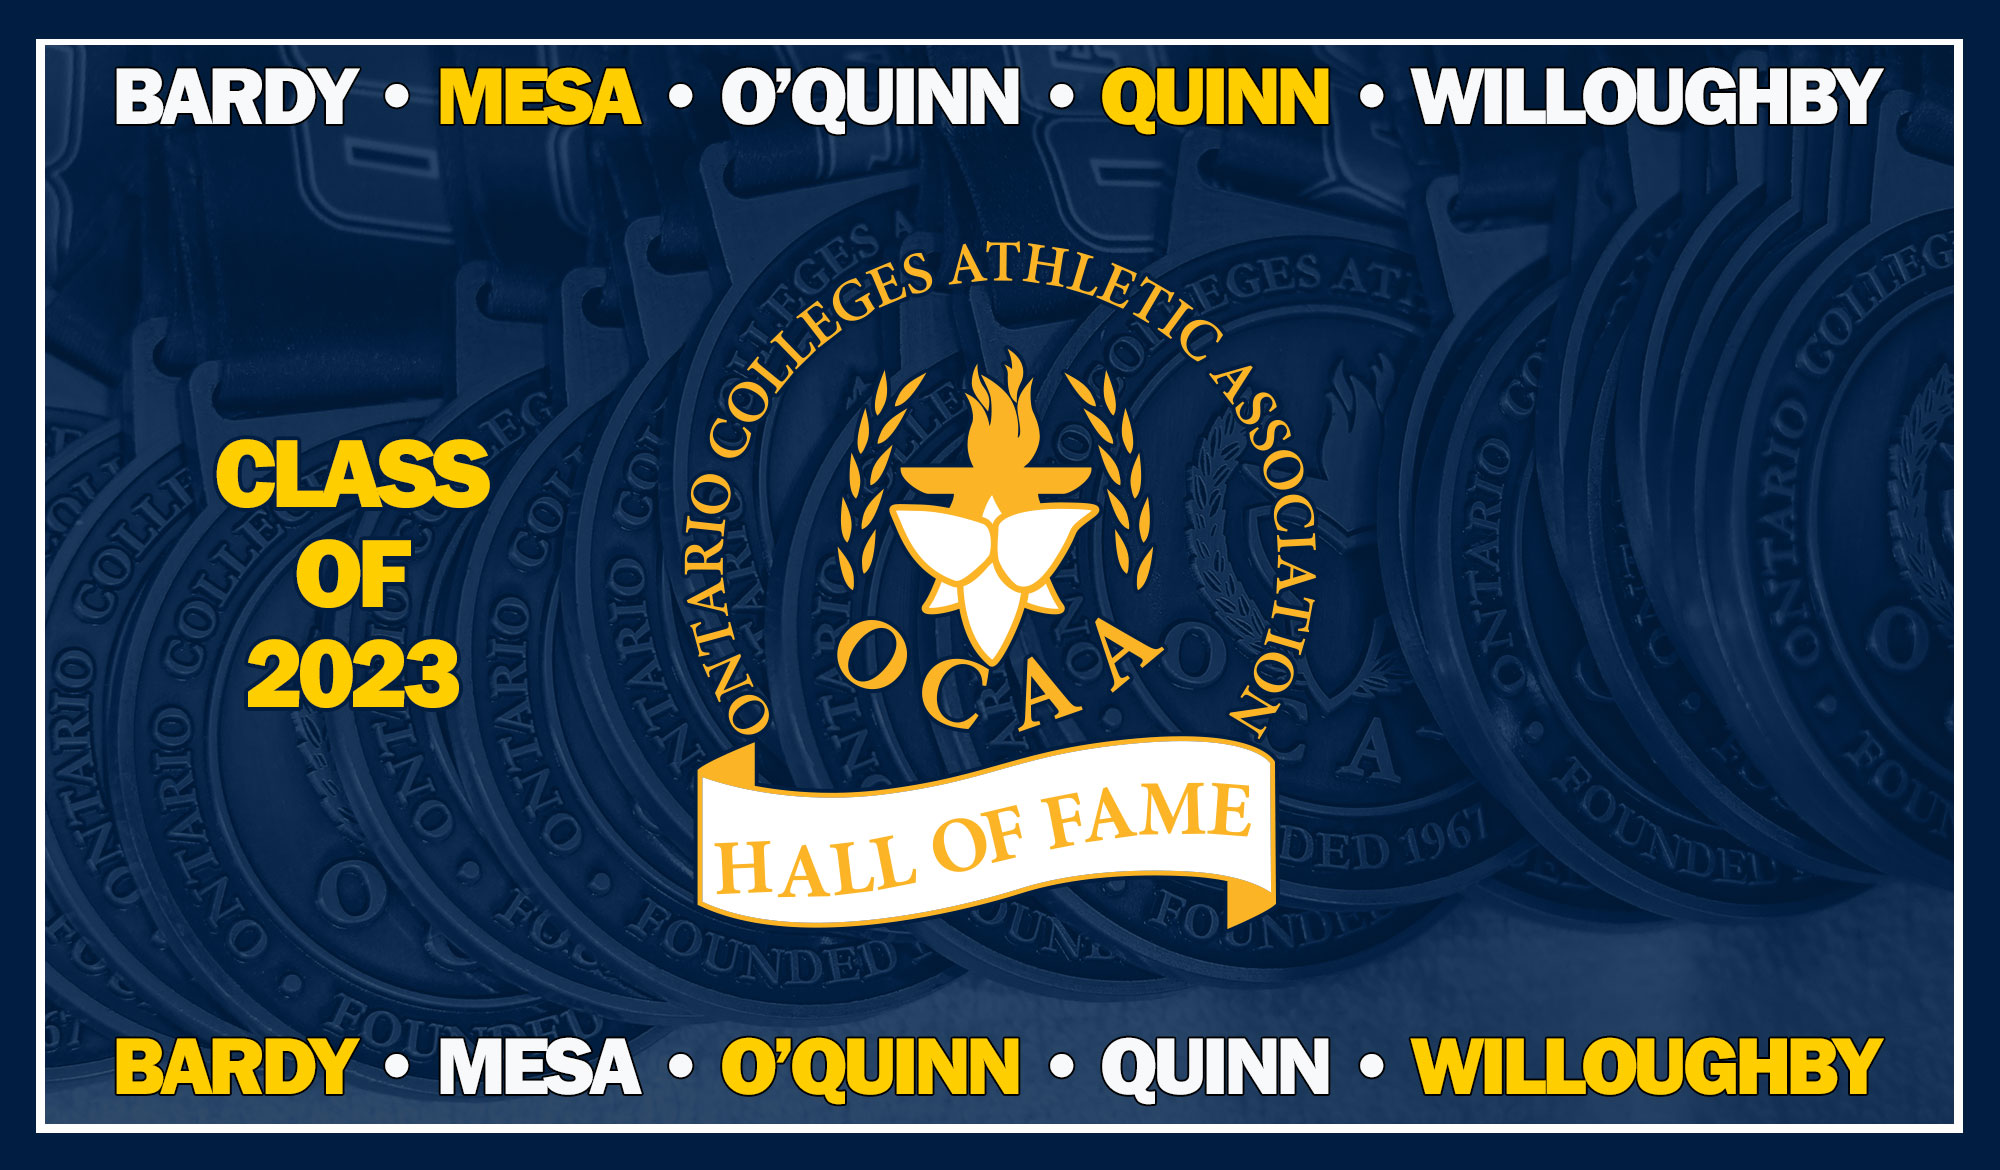 OCAA Hall of Fame logo with words: Bardy, Mesa, O'Quinn, Quinn, Willoughby